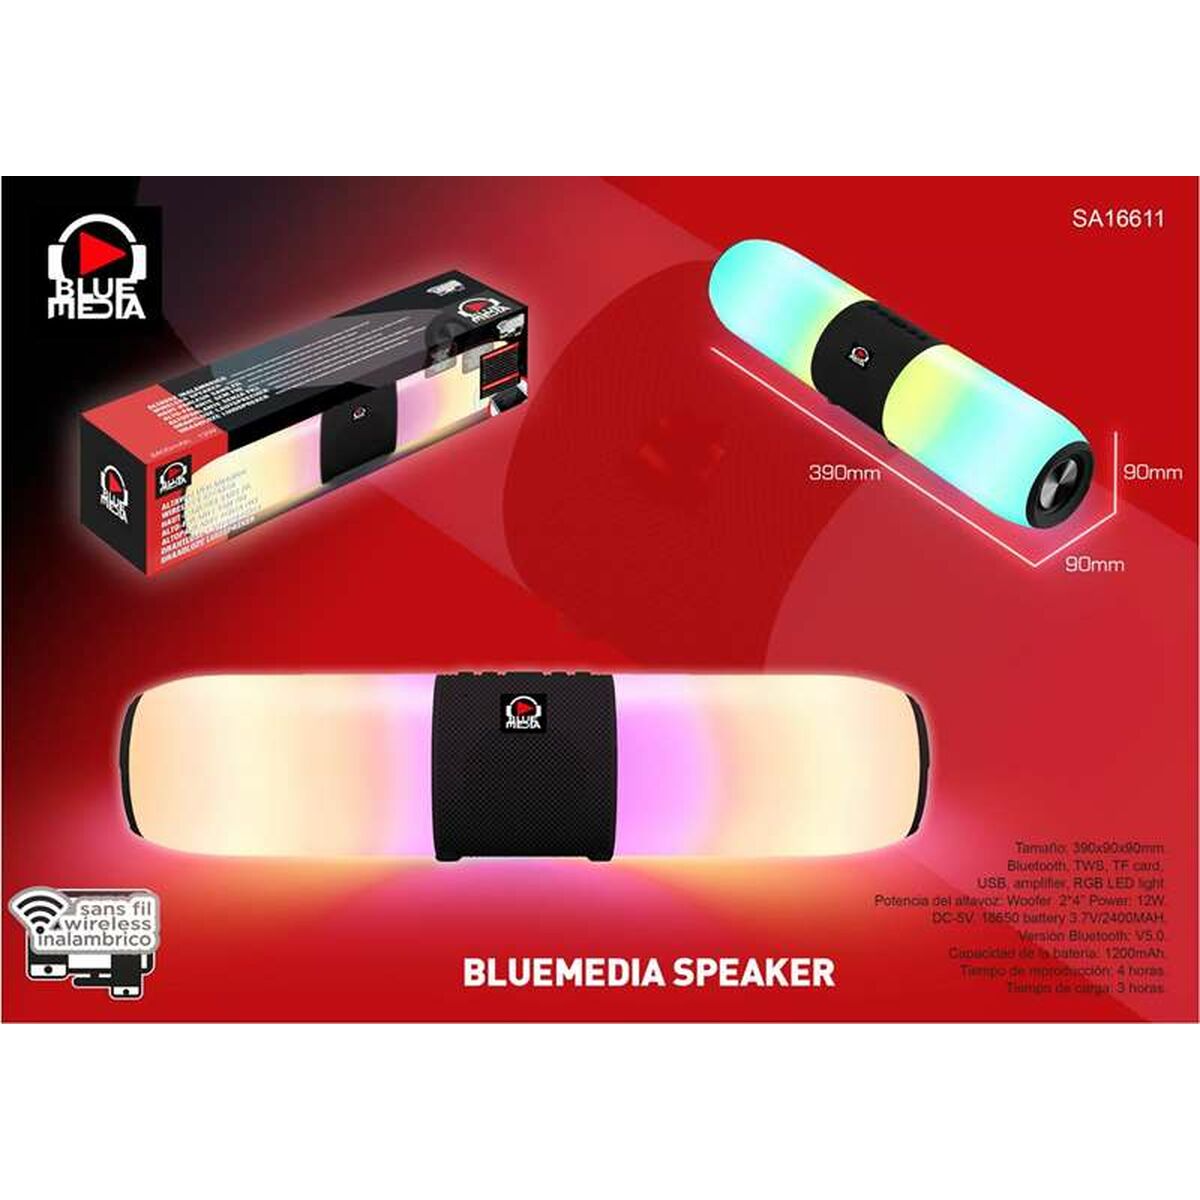 Bluetooth Speakers Reig 20 W 38 x 8 x 8 cm USB, Reig, Electronics, Mobile communication and accessories, bluetooth-speakers-reig-20-w-38-x-8-x-8-cm-usb, Brand_Reig, category-reference-2609, category-reference-2882, category-reference-2923, category-reference-t-19653, category-reference-t-21311, category-reference-t-4036, category-reference-t-4037, Condition_NEW, entertainment, music, Price_50 - 100, telephones & tablets, wifi y bluetooth, RiotNook